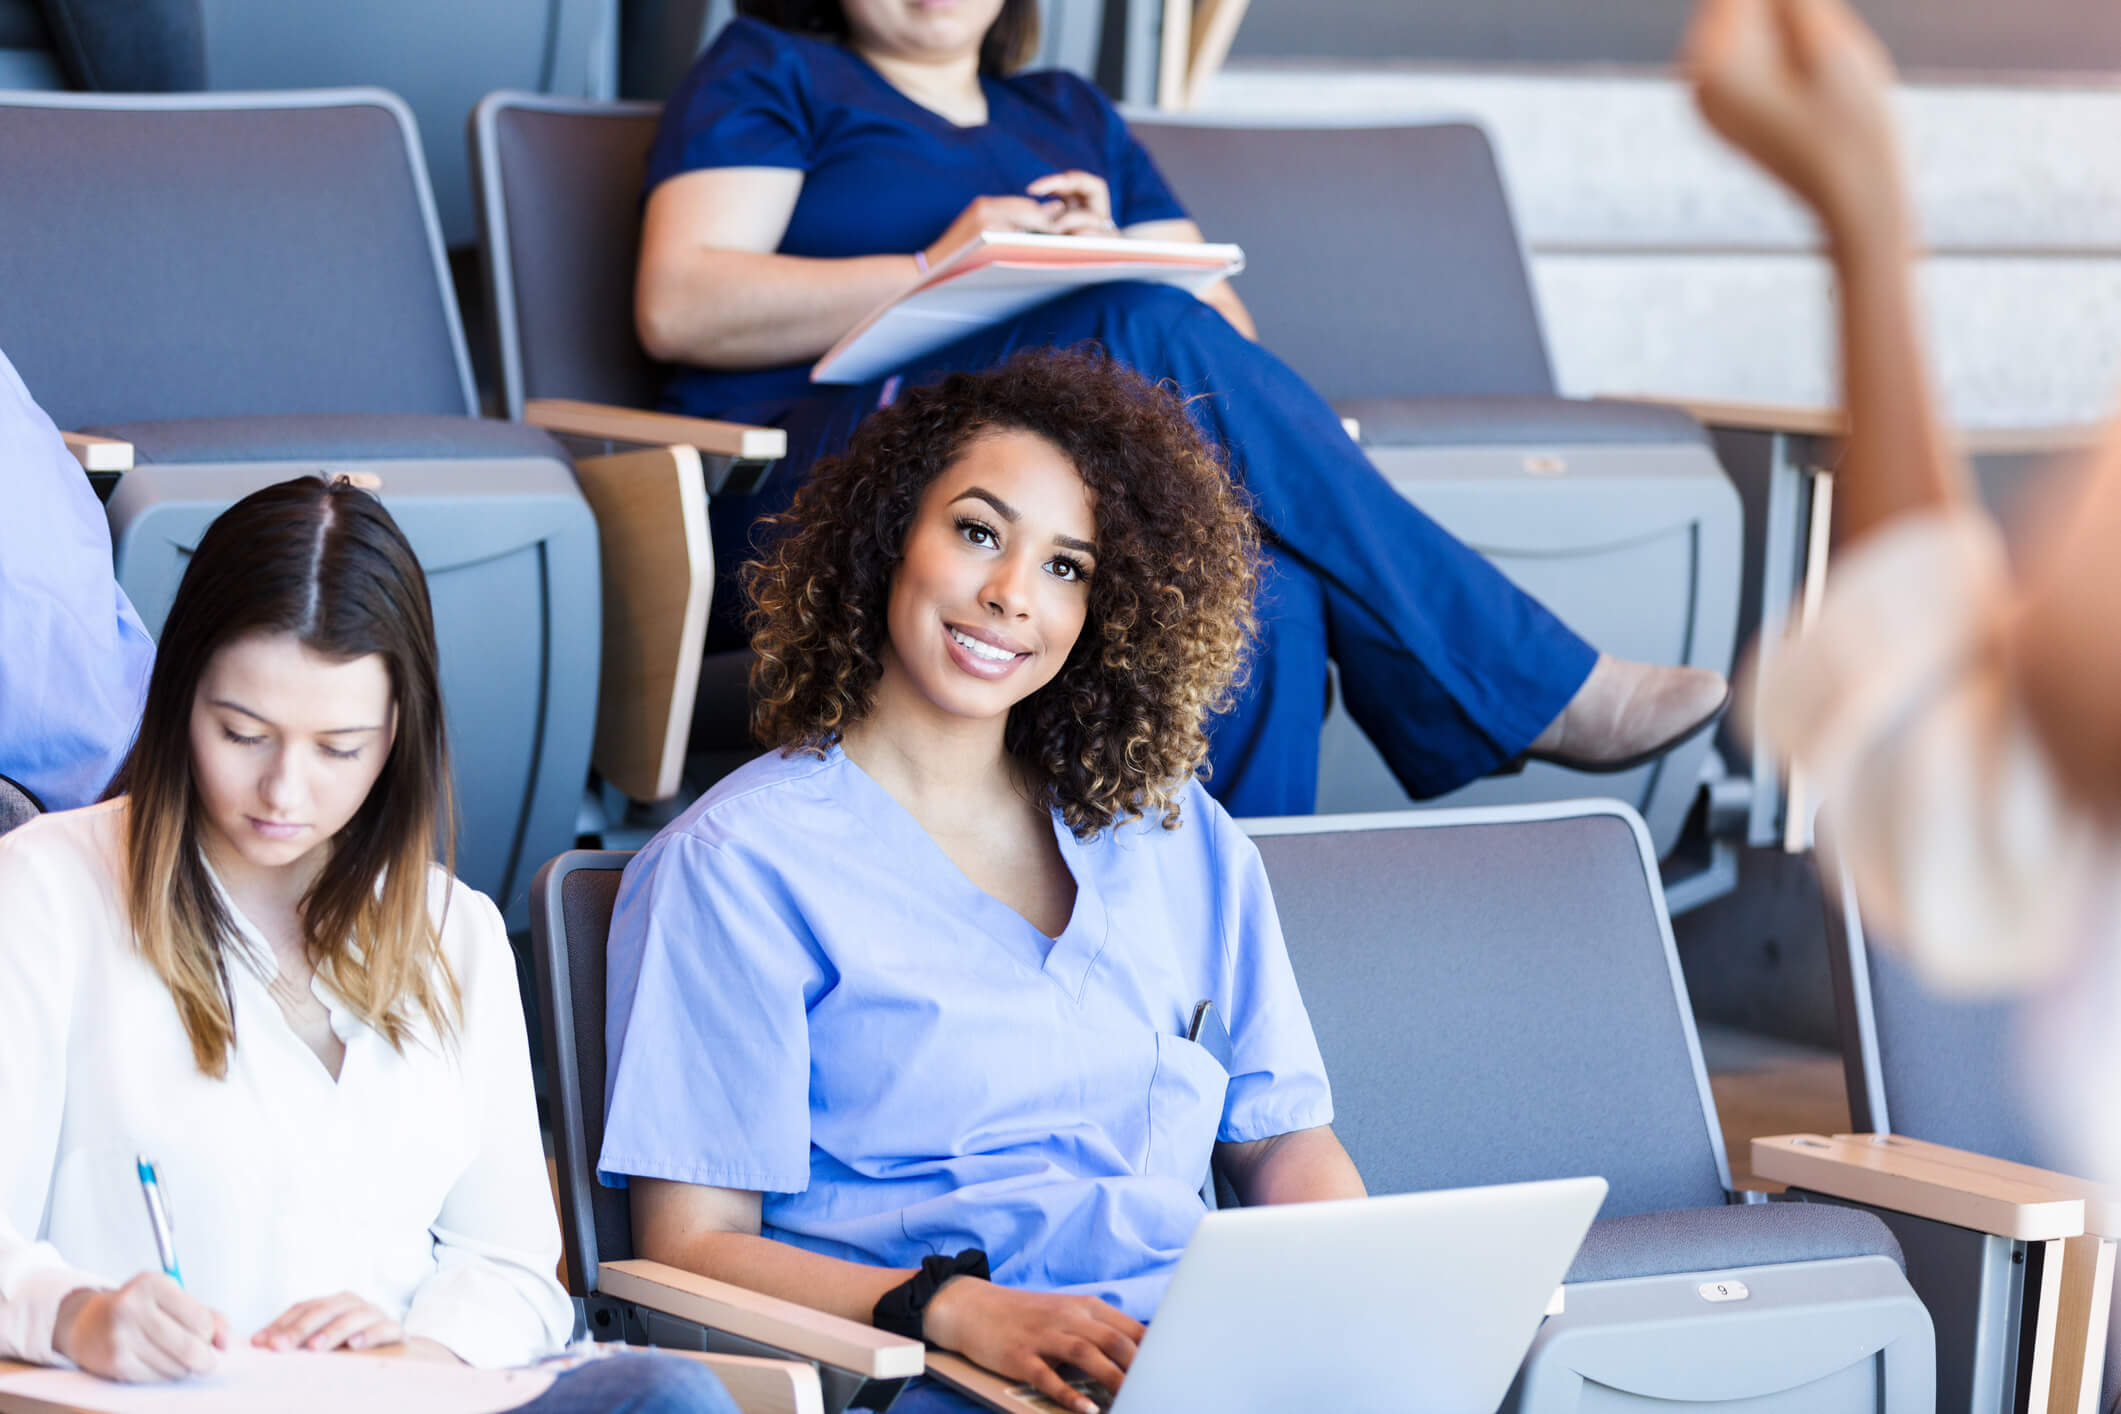 A female African-American nursing student smiles while taking notes on her laptop during a lecture. She is wearing light blue scrubs. Her classmates are sitting next to her and in the auditorium rows in the background.